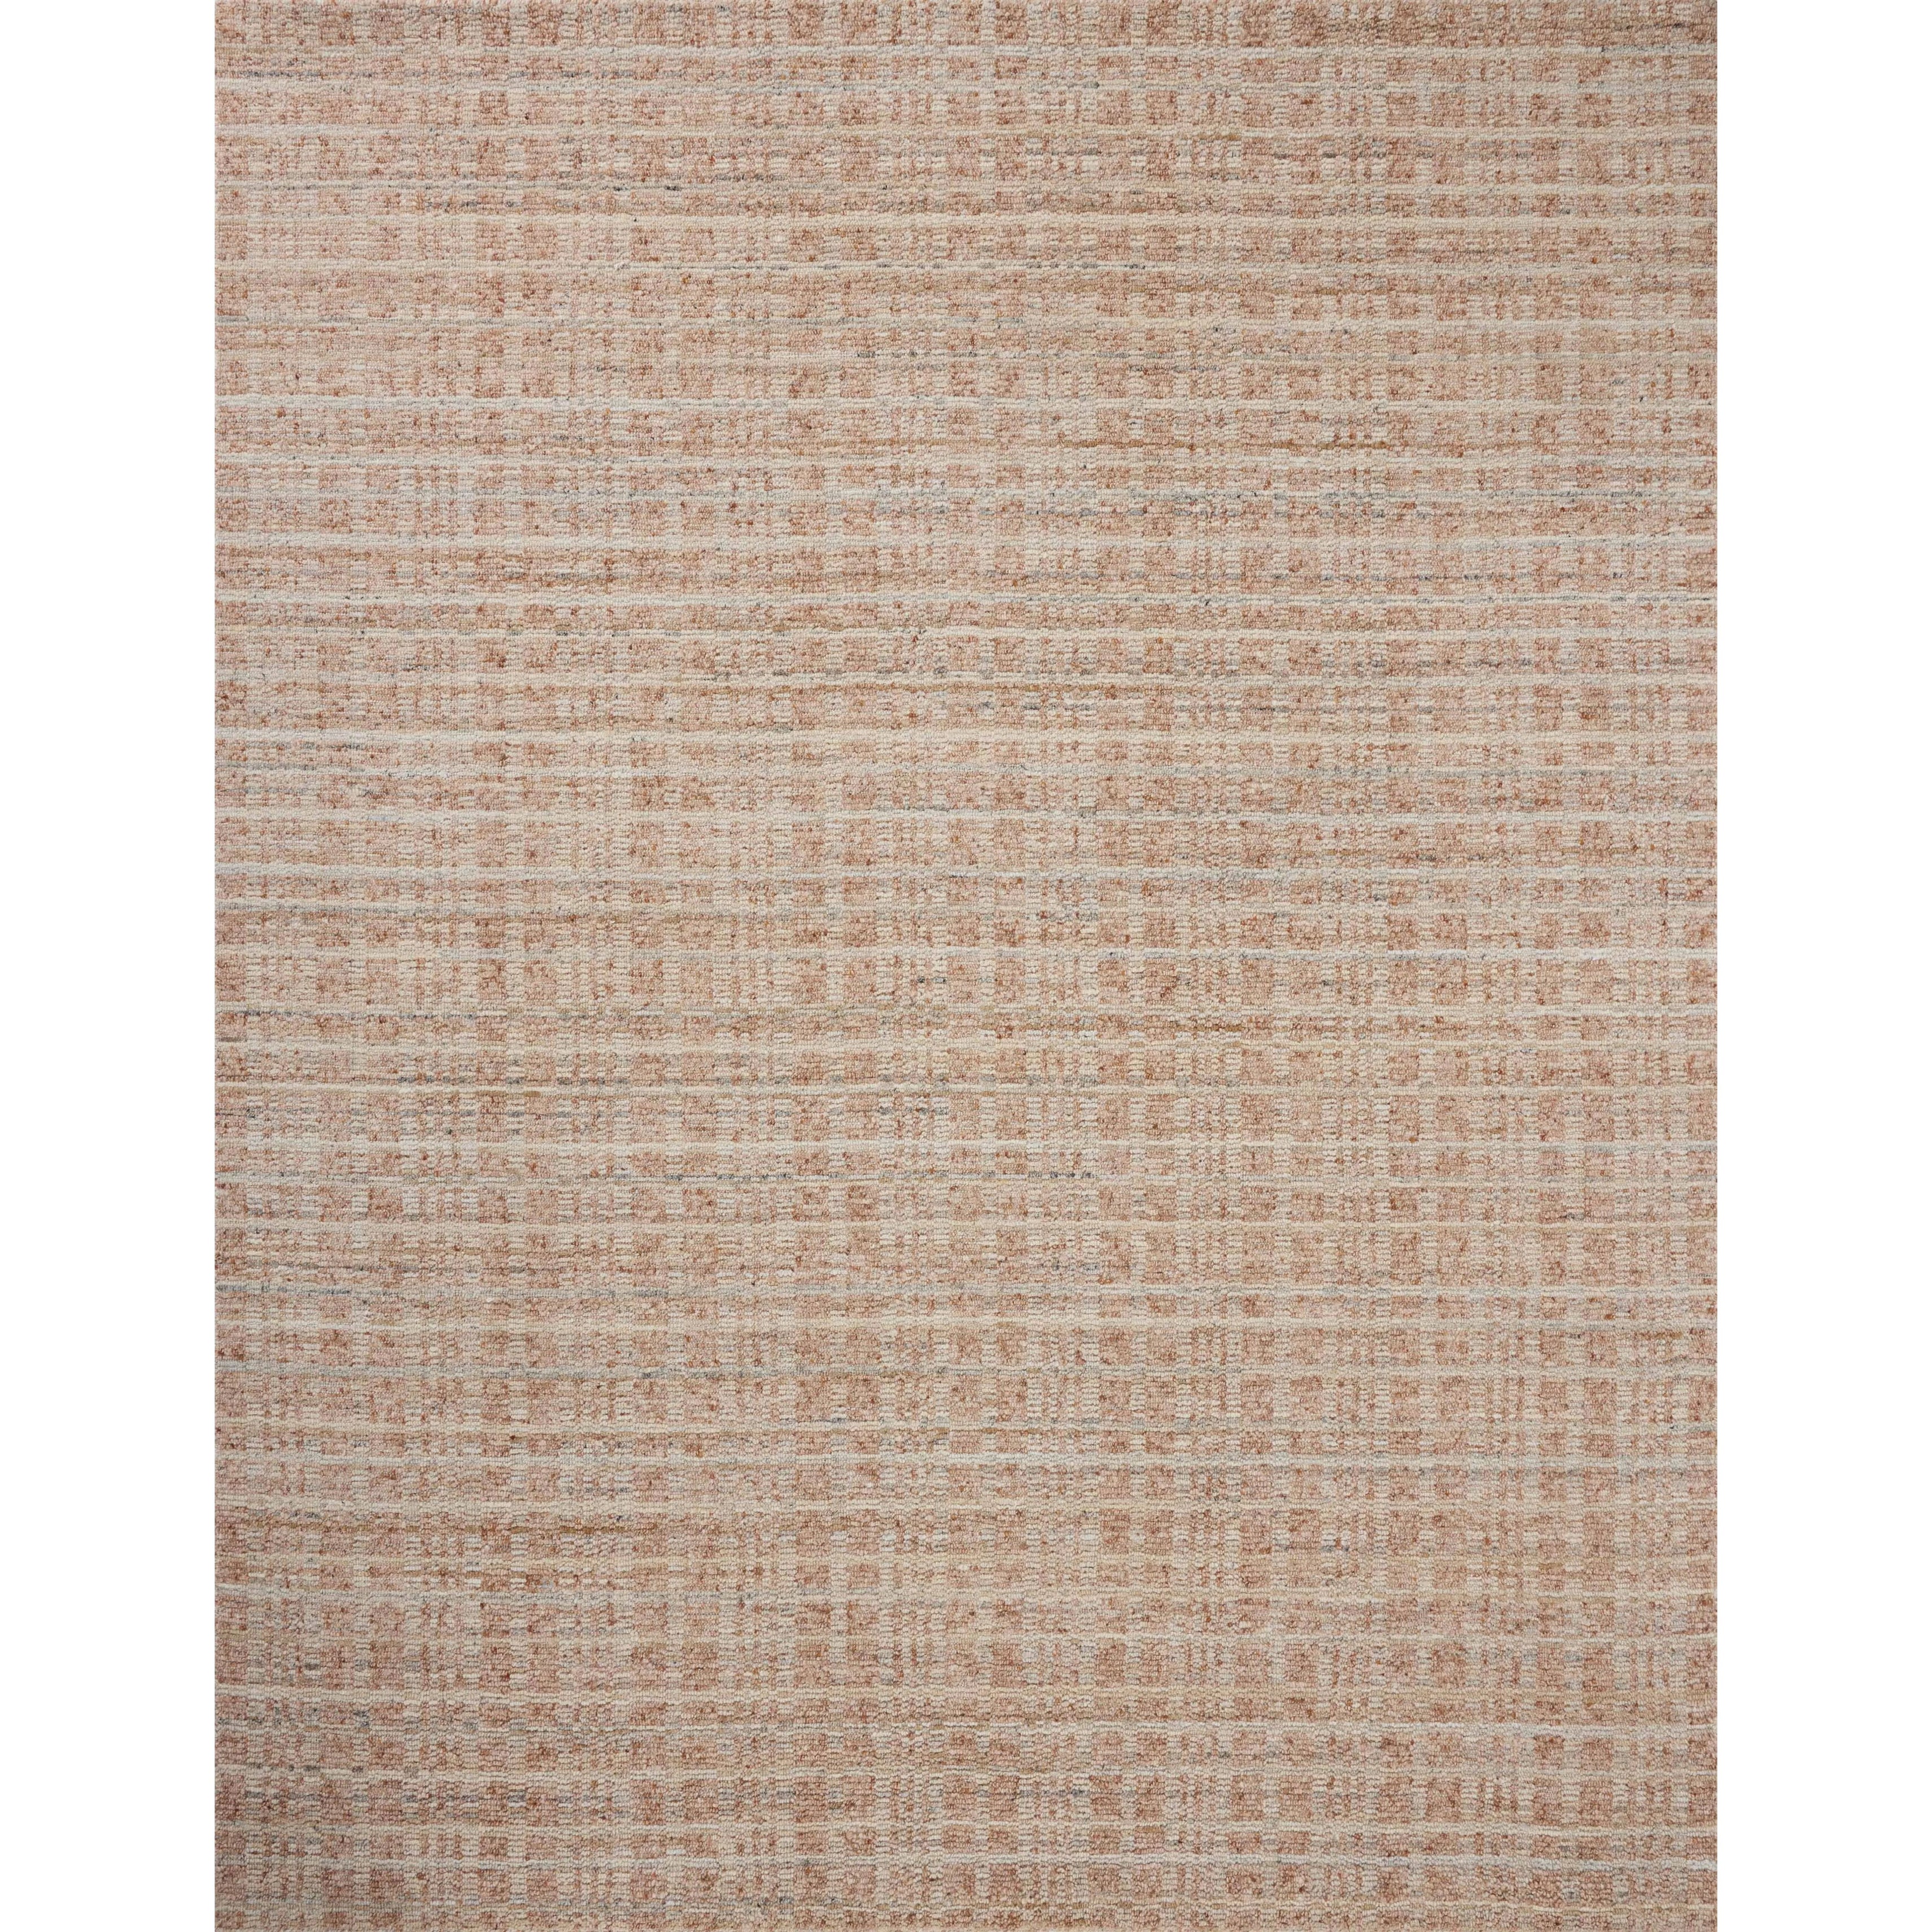 The Sonya Terracotta / Natural Rug is a hand-loomed area rug with a light, airy palette and understated graphic design. The rug’s textural pile is a soft blend of wool and nylon that creates dimension in living rooms, bedrooms, and more. Amethyst Home provides interior design, new home construction design consulting, vintage area rugs, and lighting in the Houston metro area.